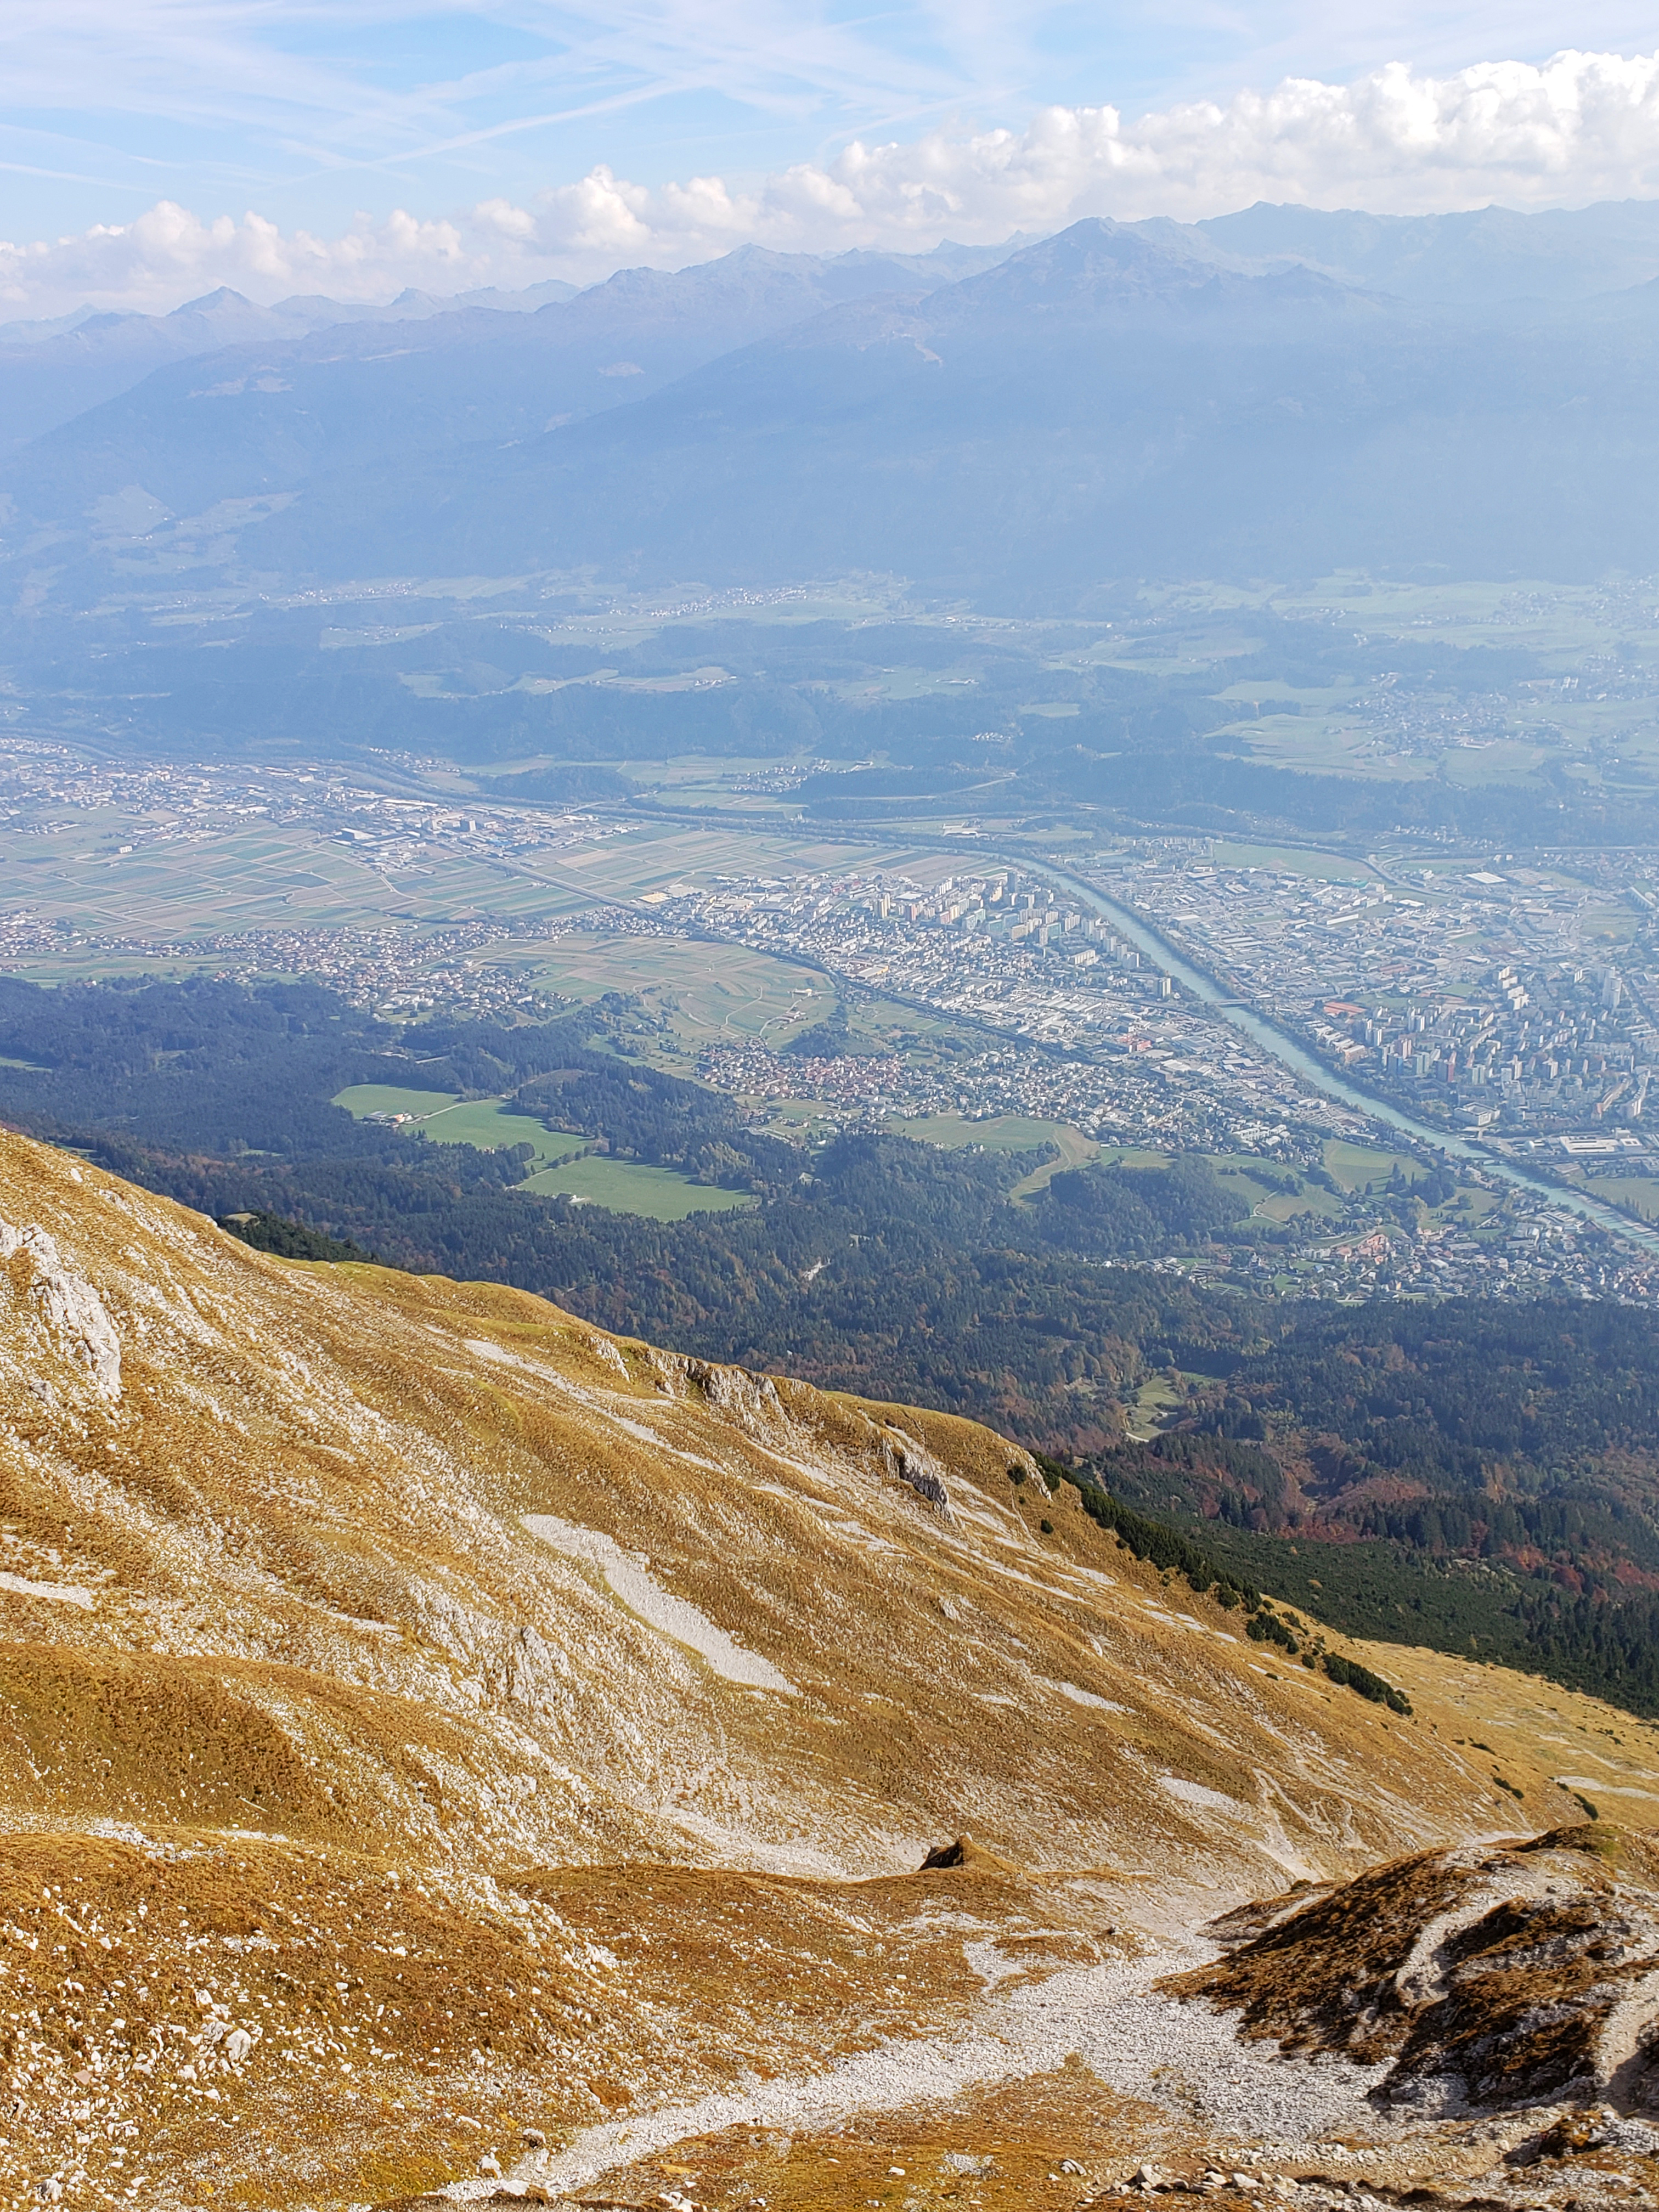 Riding_The_Innsbruck_Cable_Car - A_Guide_To_The_Nordkettenbahnen